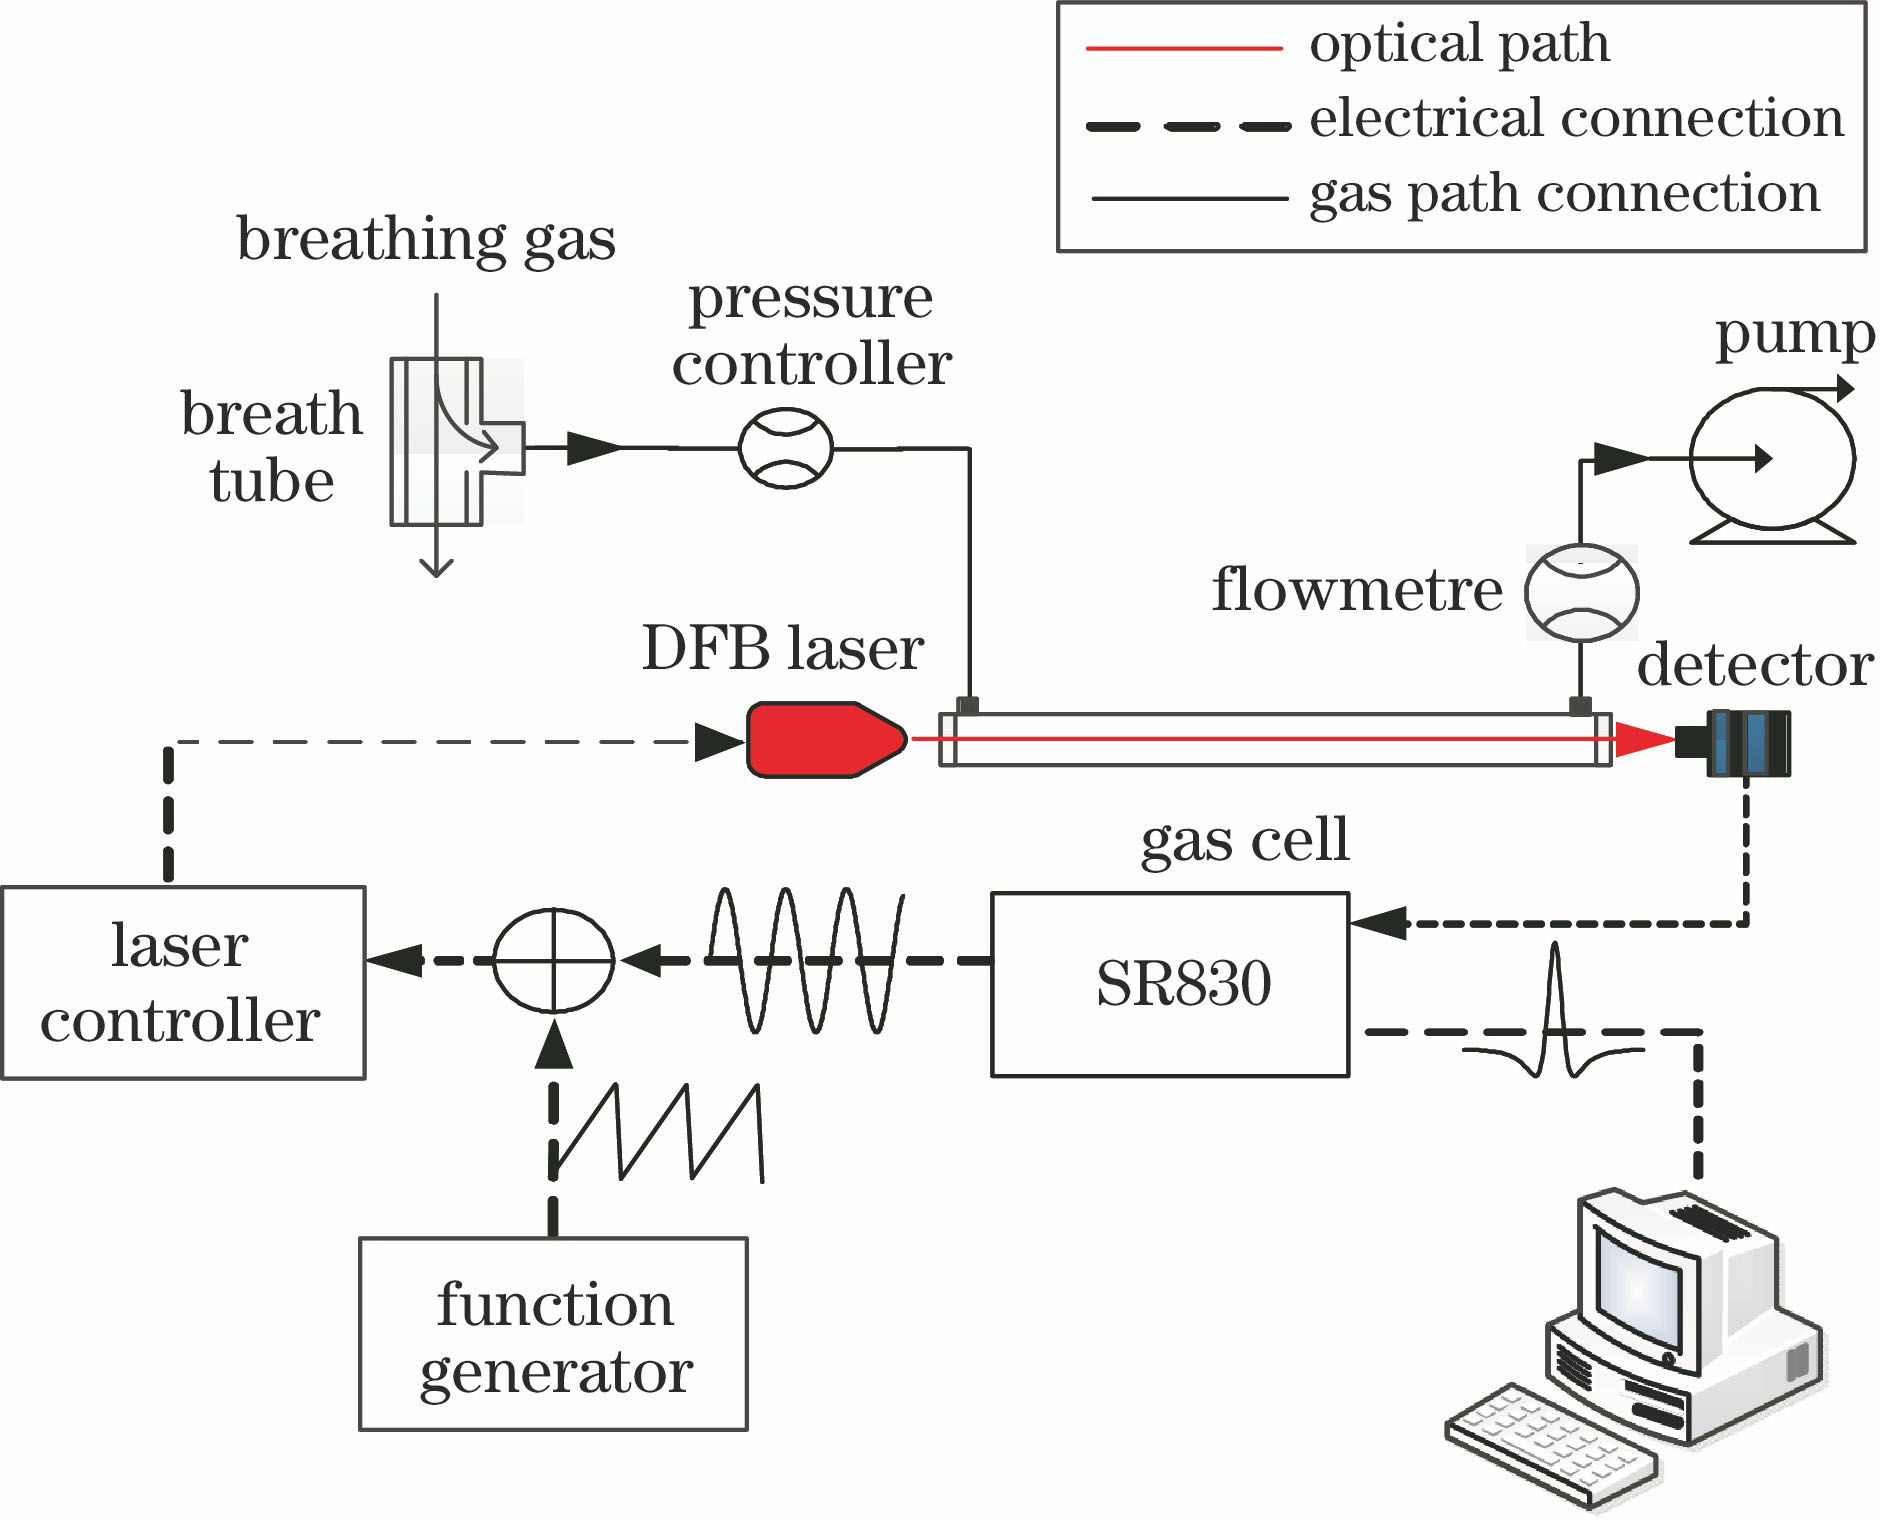 Exhaled gas detection system based on DFB laser